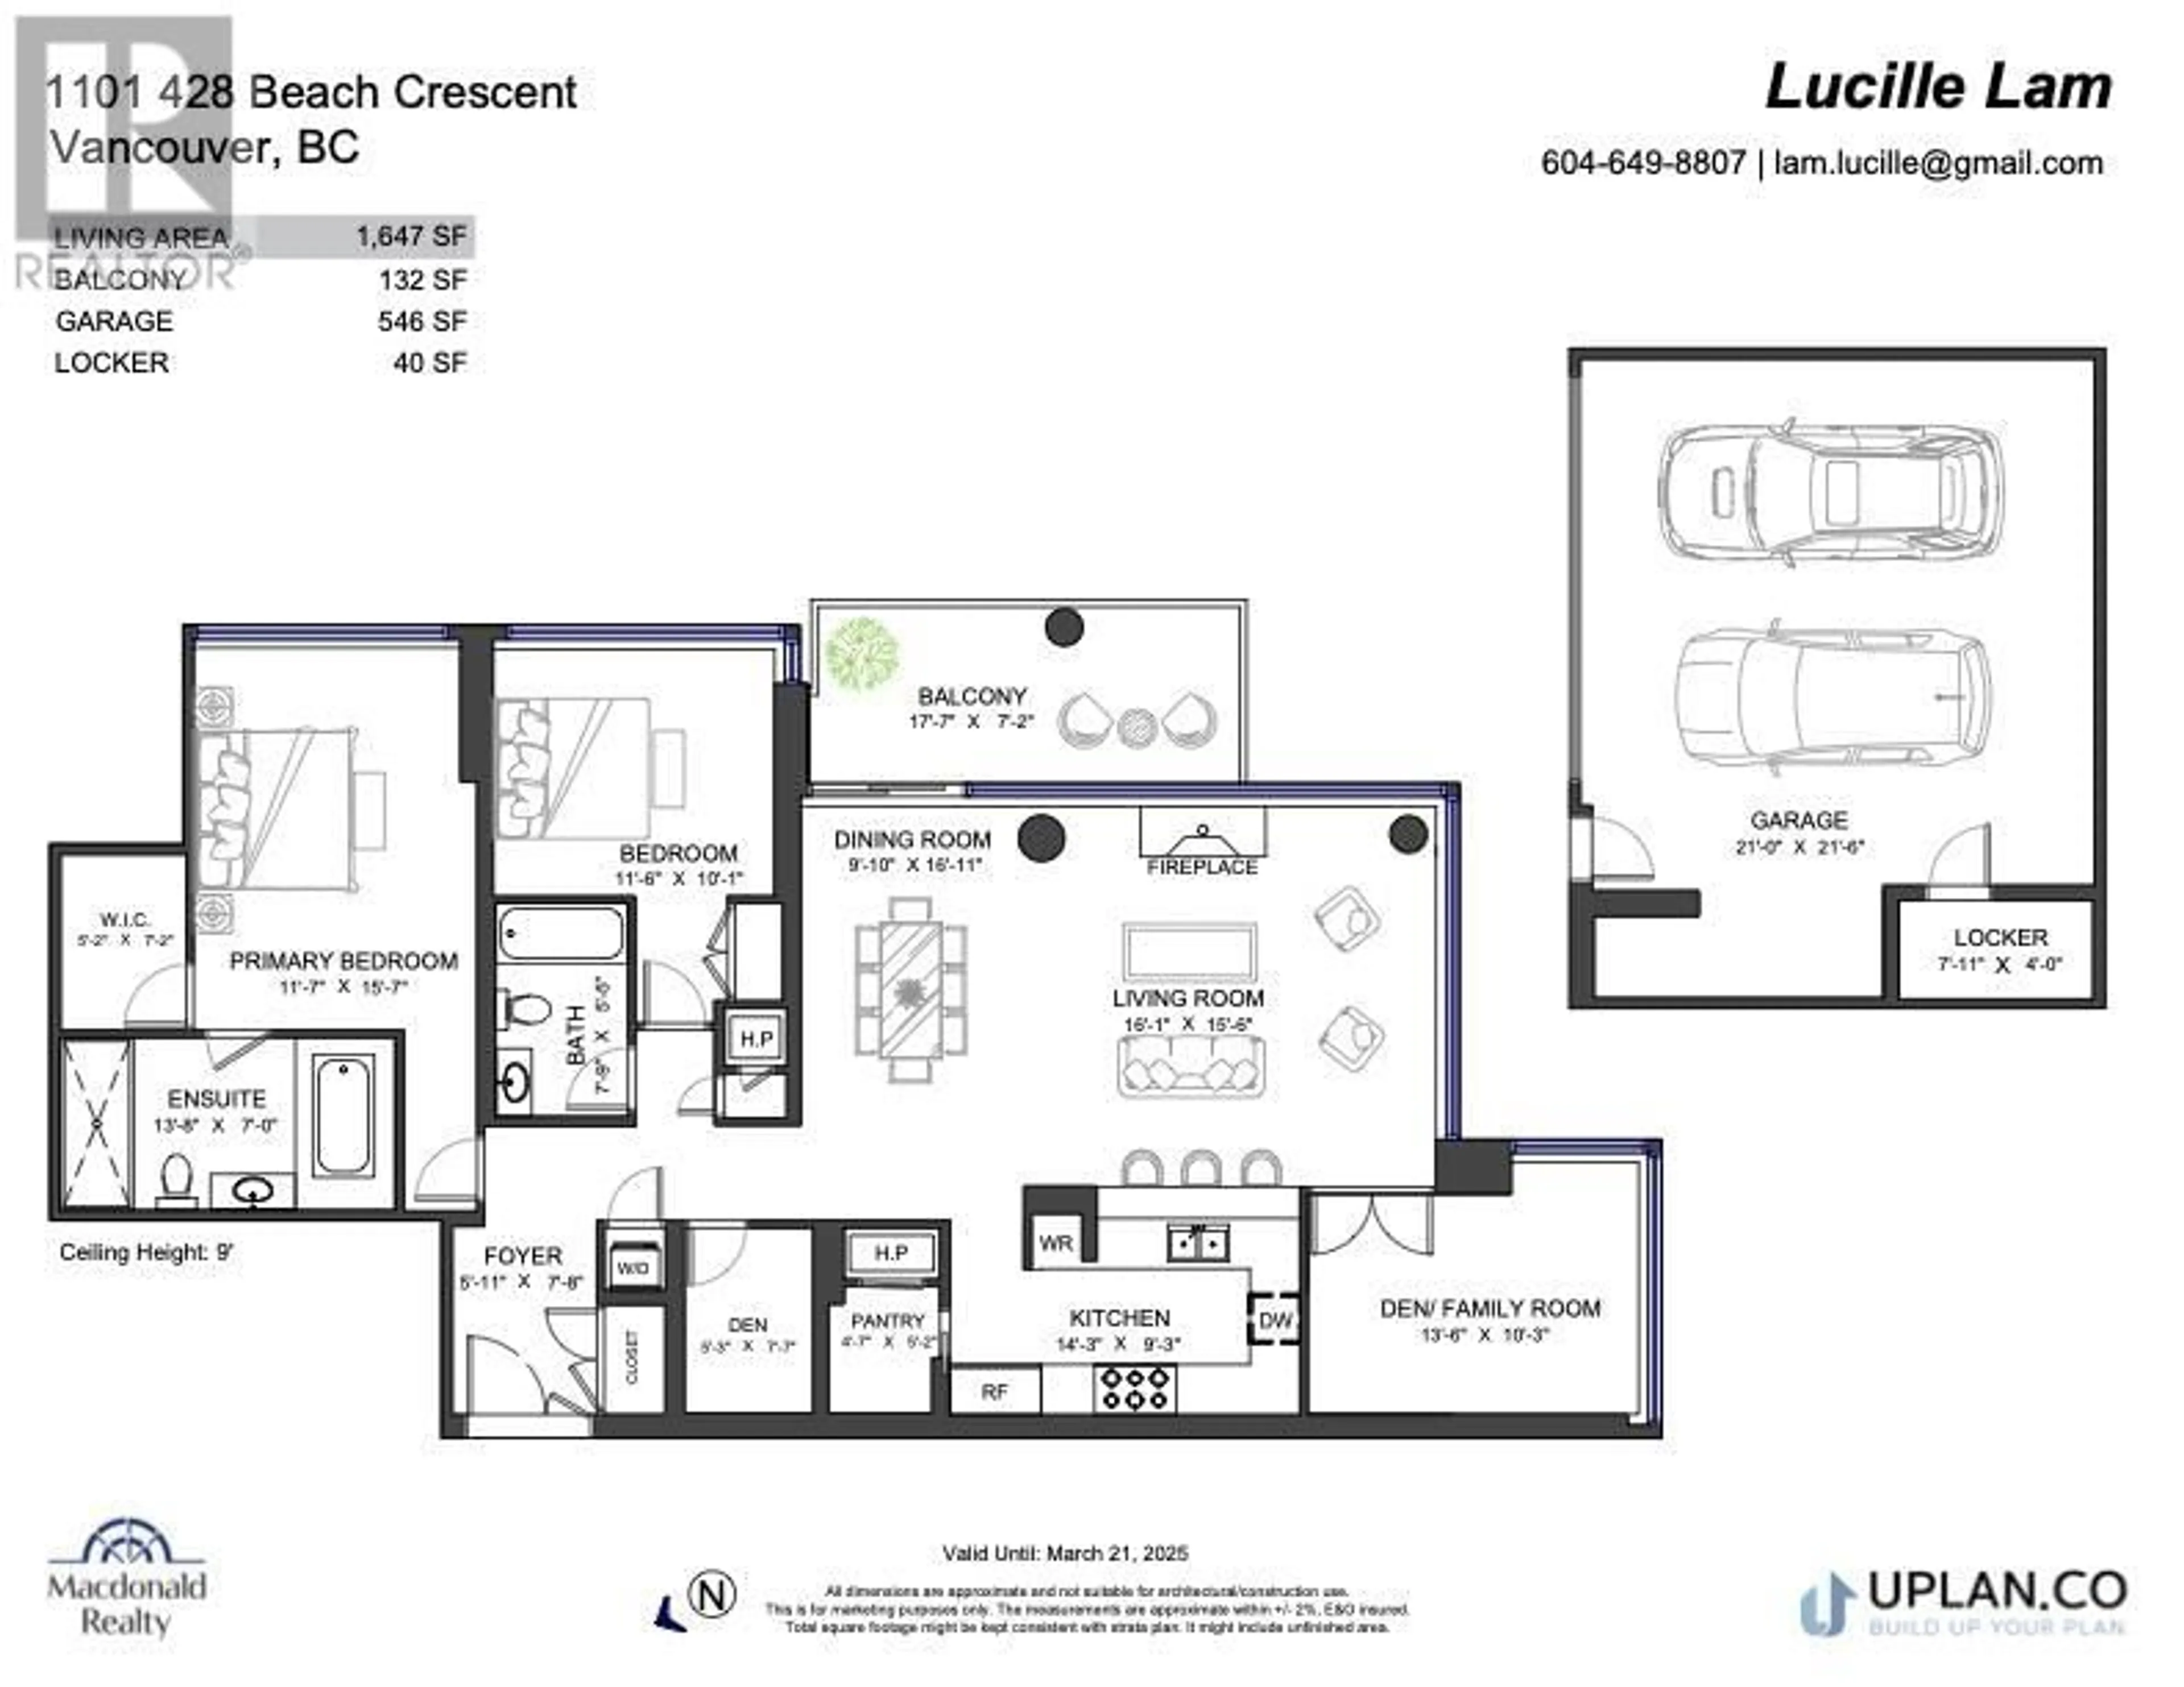 Floor plan for 1101 428 BEACH CRESCENT, Vancouver British Columbia V6Z3G1